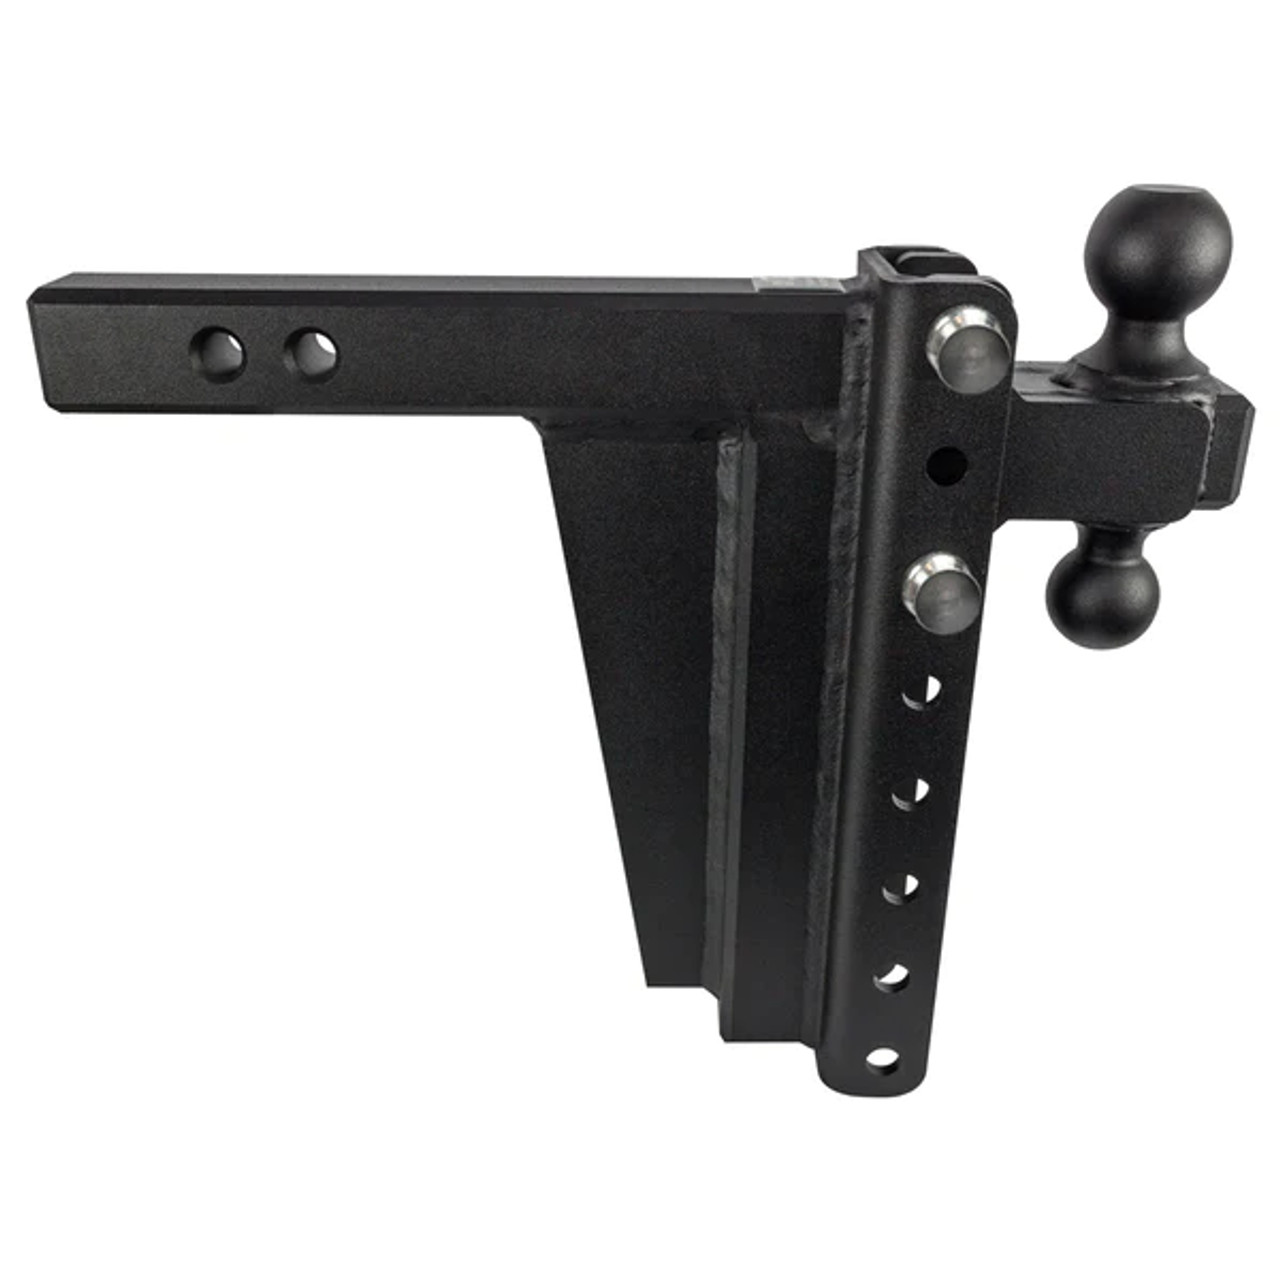 BPED2010 --- Dual-Ball Six Position 2" Shank Extreme Duty Hitch - 30k